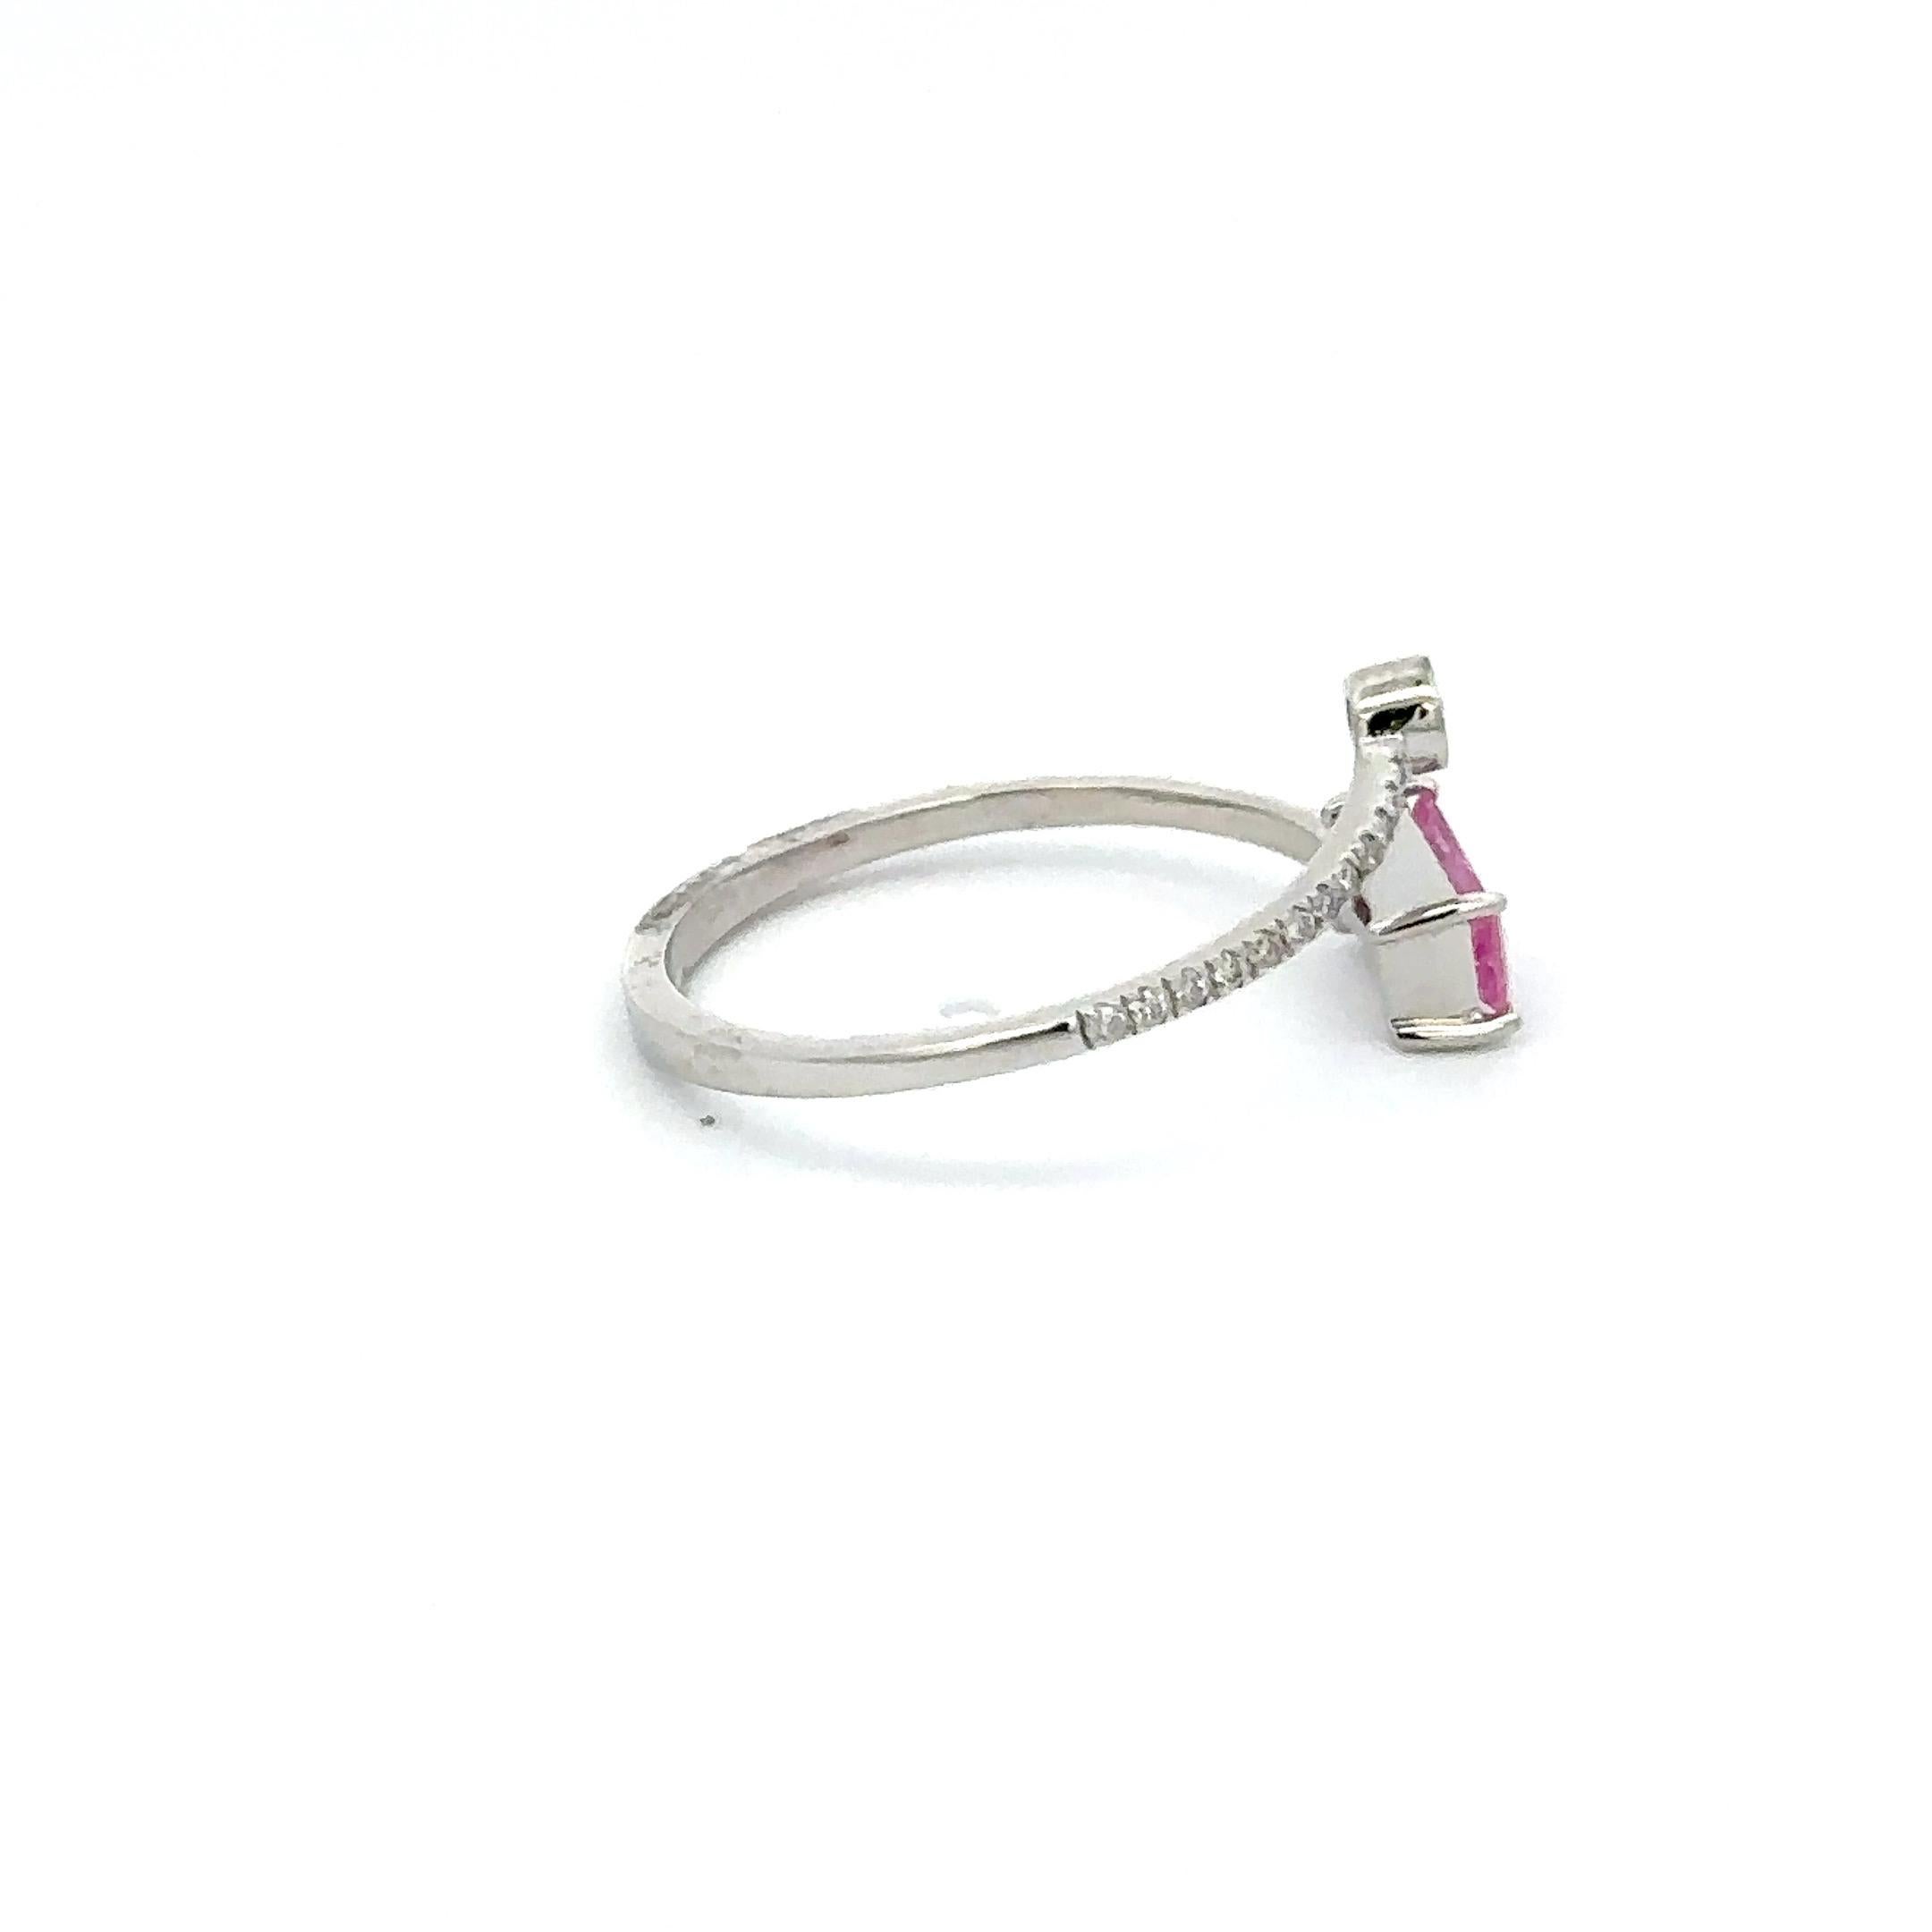 For Sale:  Minimalist Open Ended Ring with Baguette Cut Pink Sapphire and Diamond 8